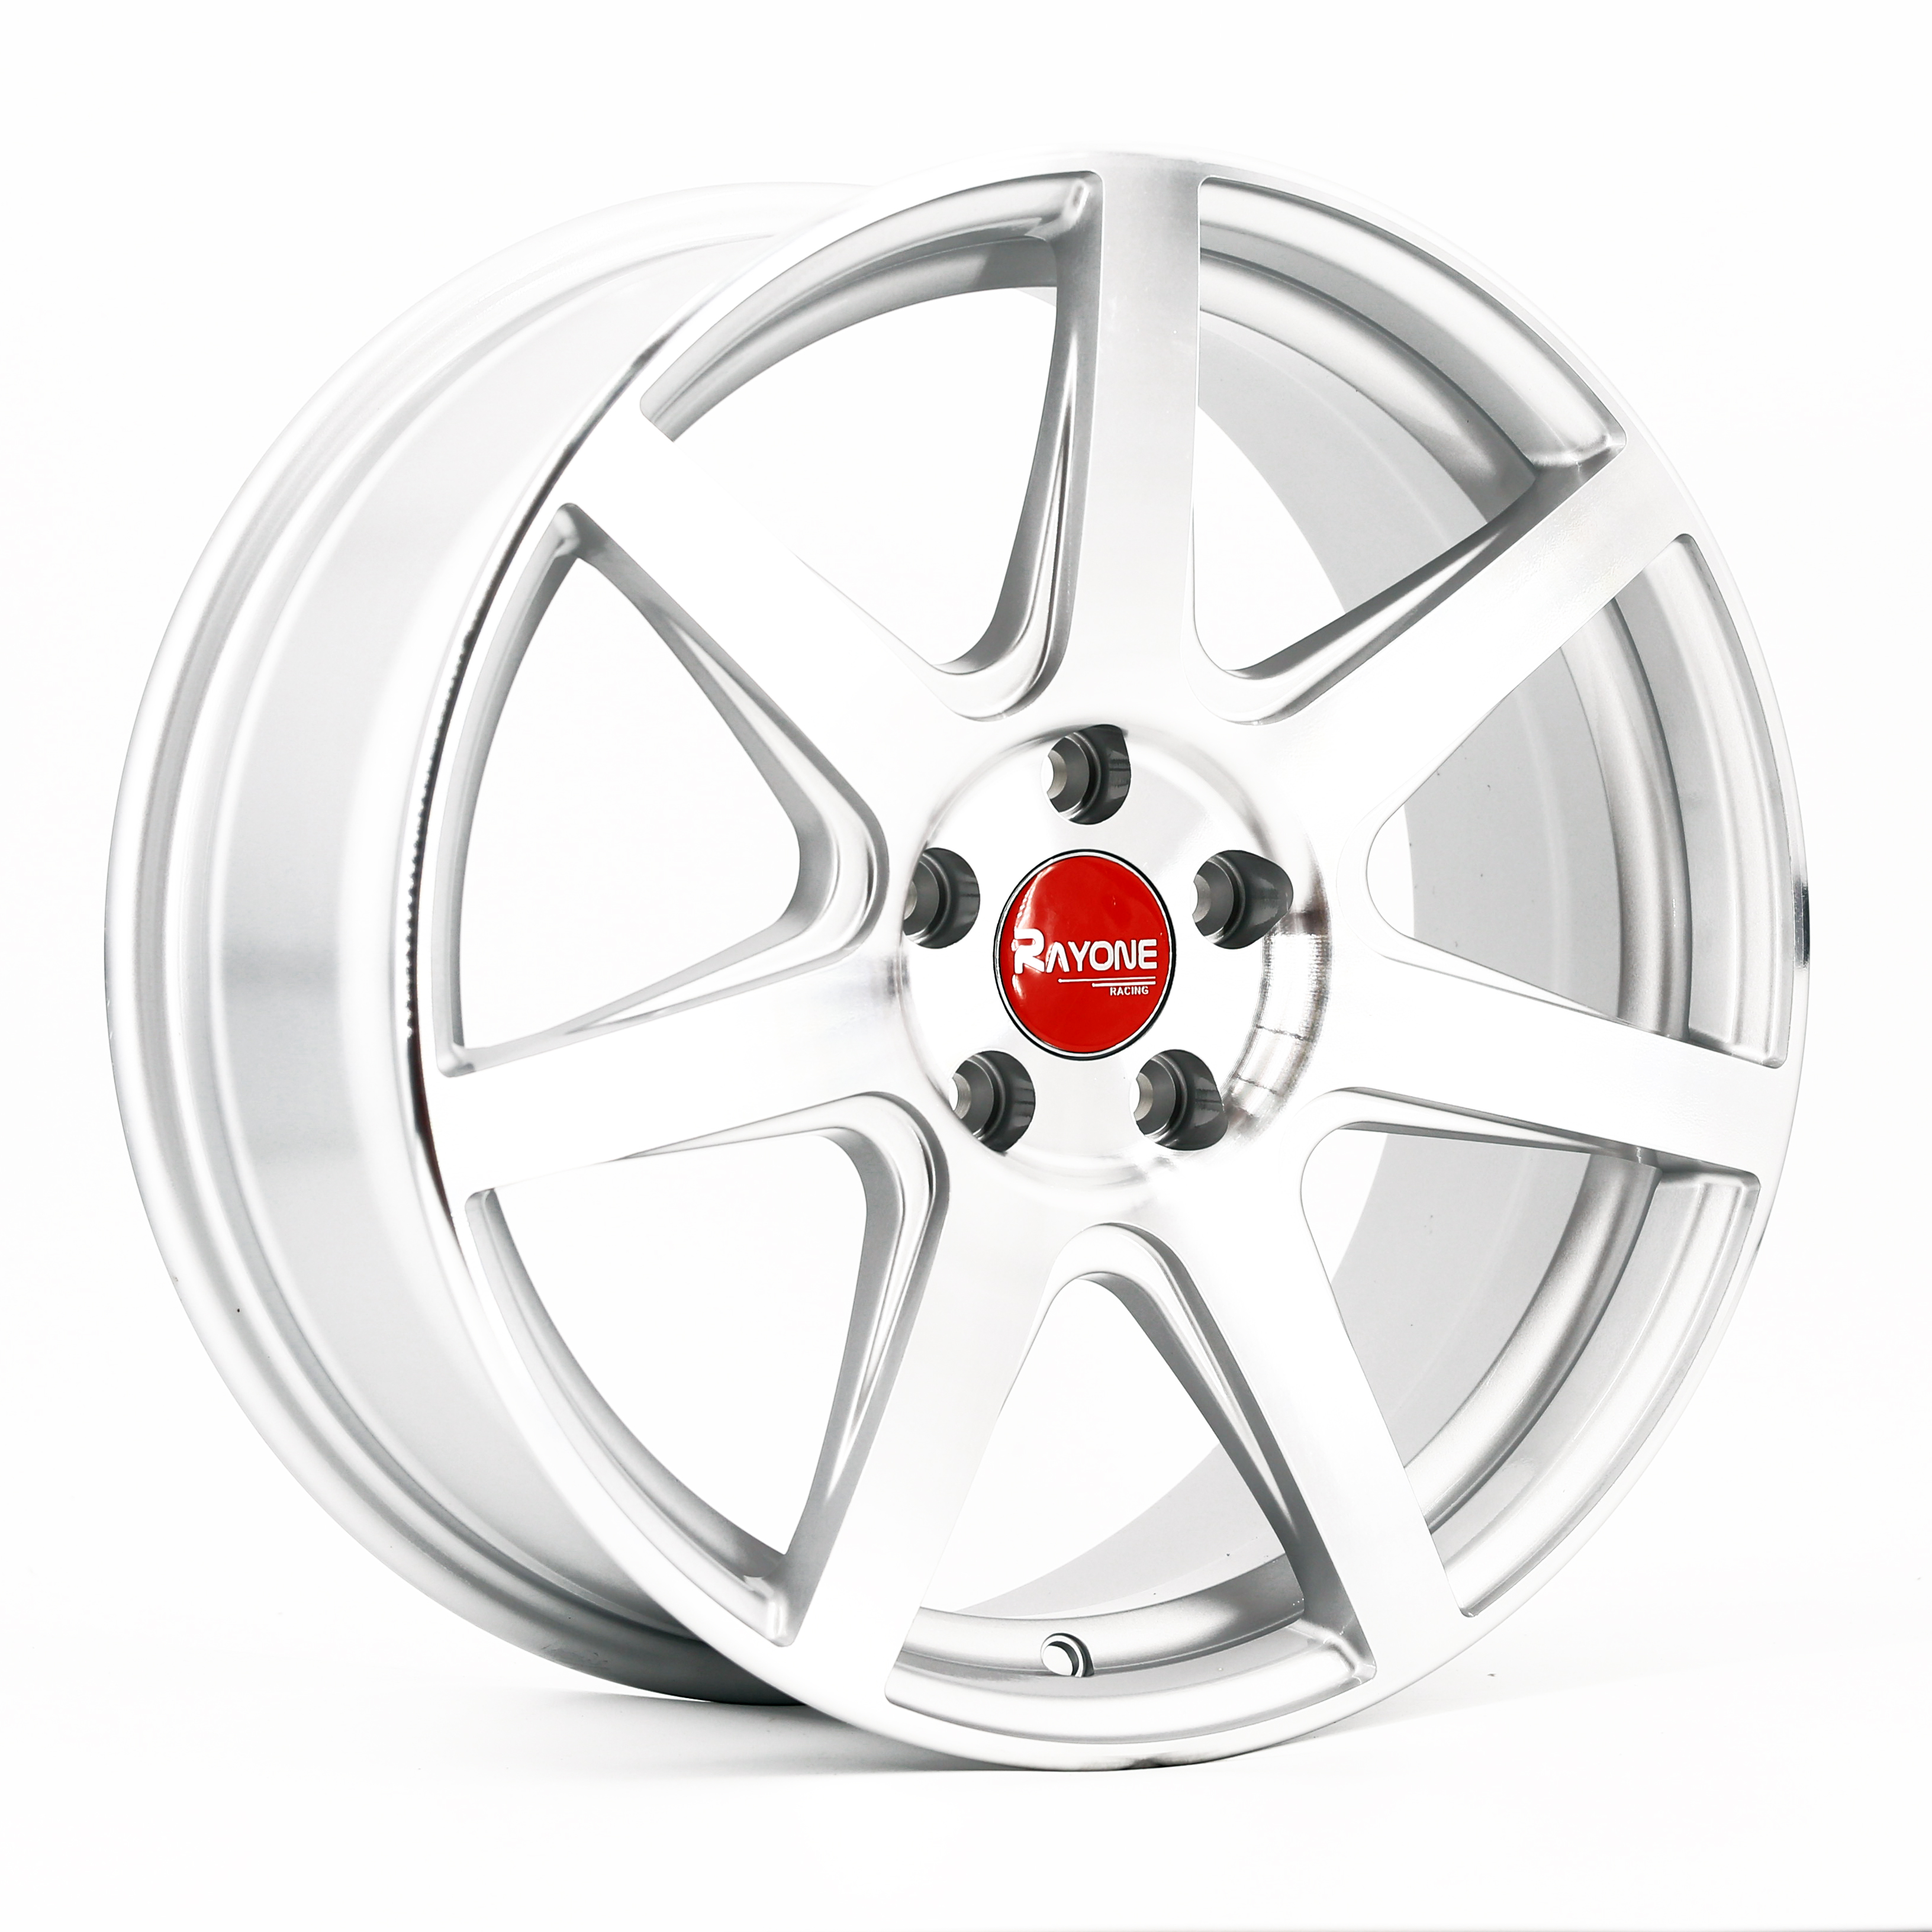 One of Hottest for Star Mag Wheels - Rayone New Design Seven Spoke 17/18Inch Car Alloy Wheel Rims For Racing Car – Rayone